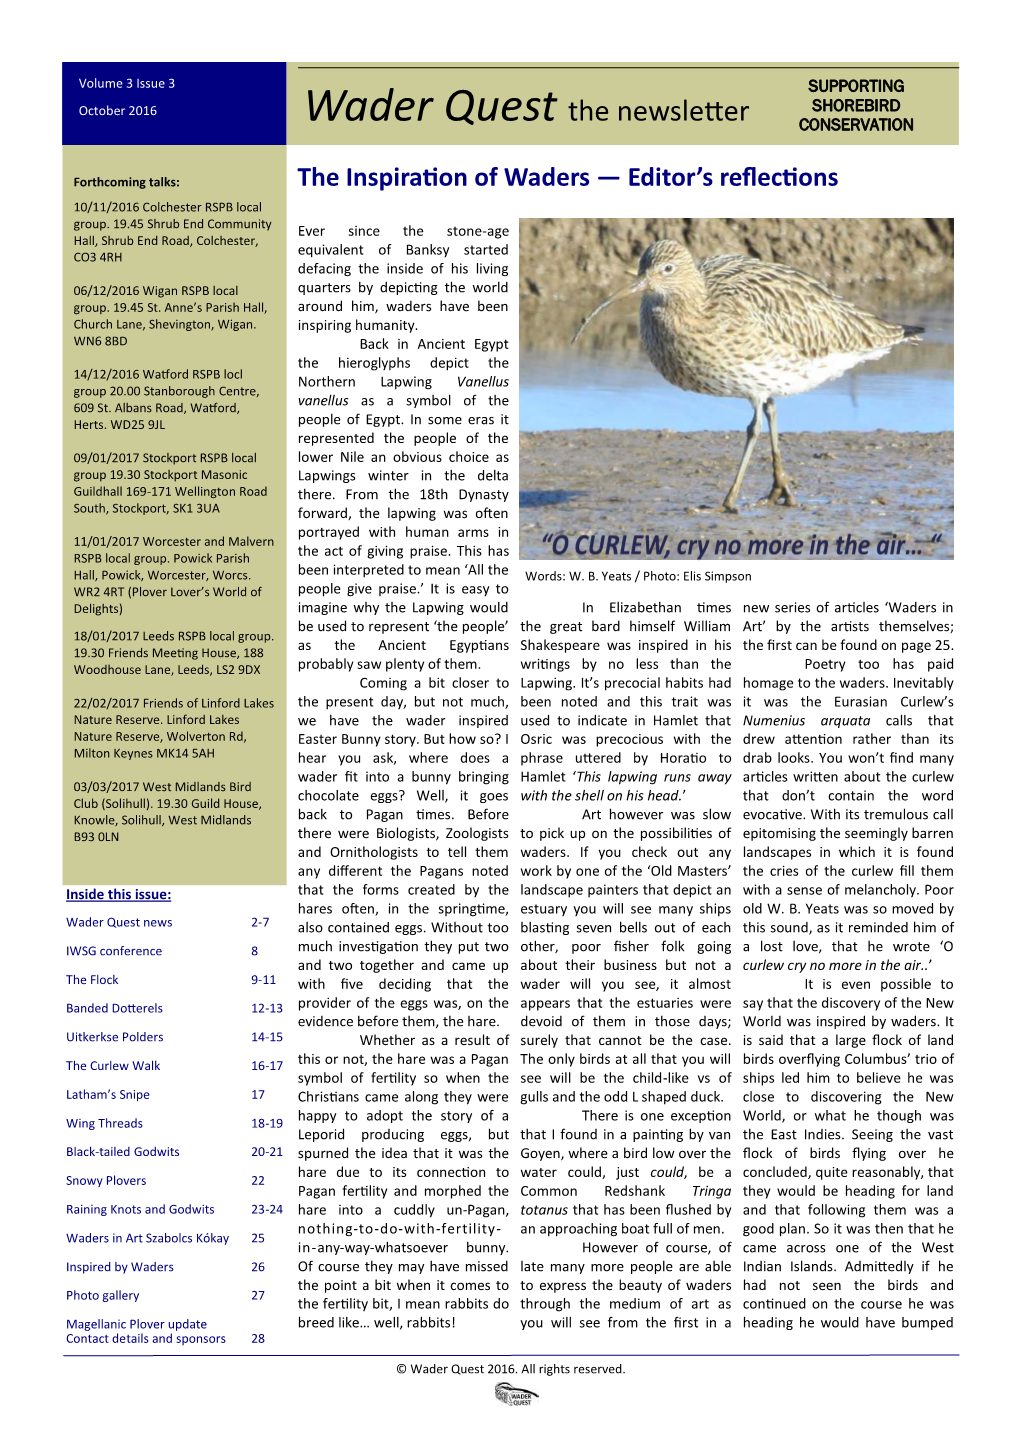 Wader Quest the Newsletter Vol 3 Issue 3 2016